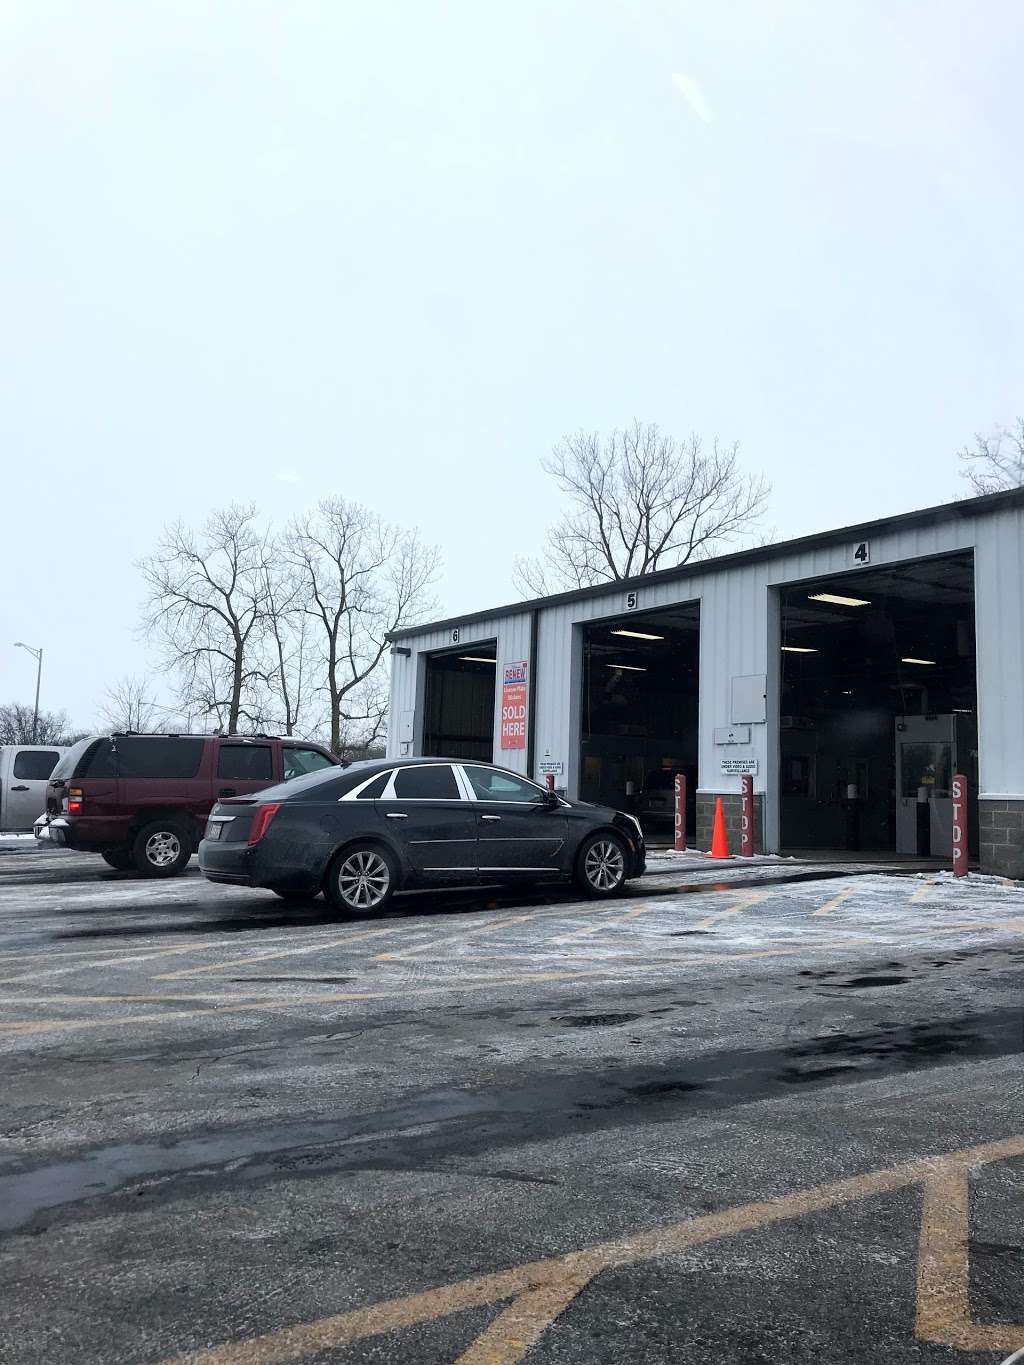 Air Team Vehicle Emissions Testing Station - Markham (owned & op | 3824 W 159th Pl, Markham, IL 60428, USA | Phone: (844) 258-9071